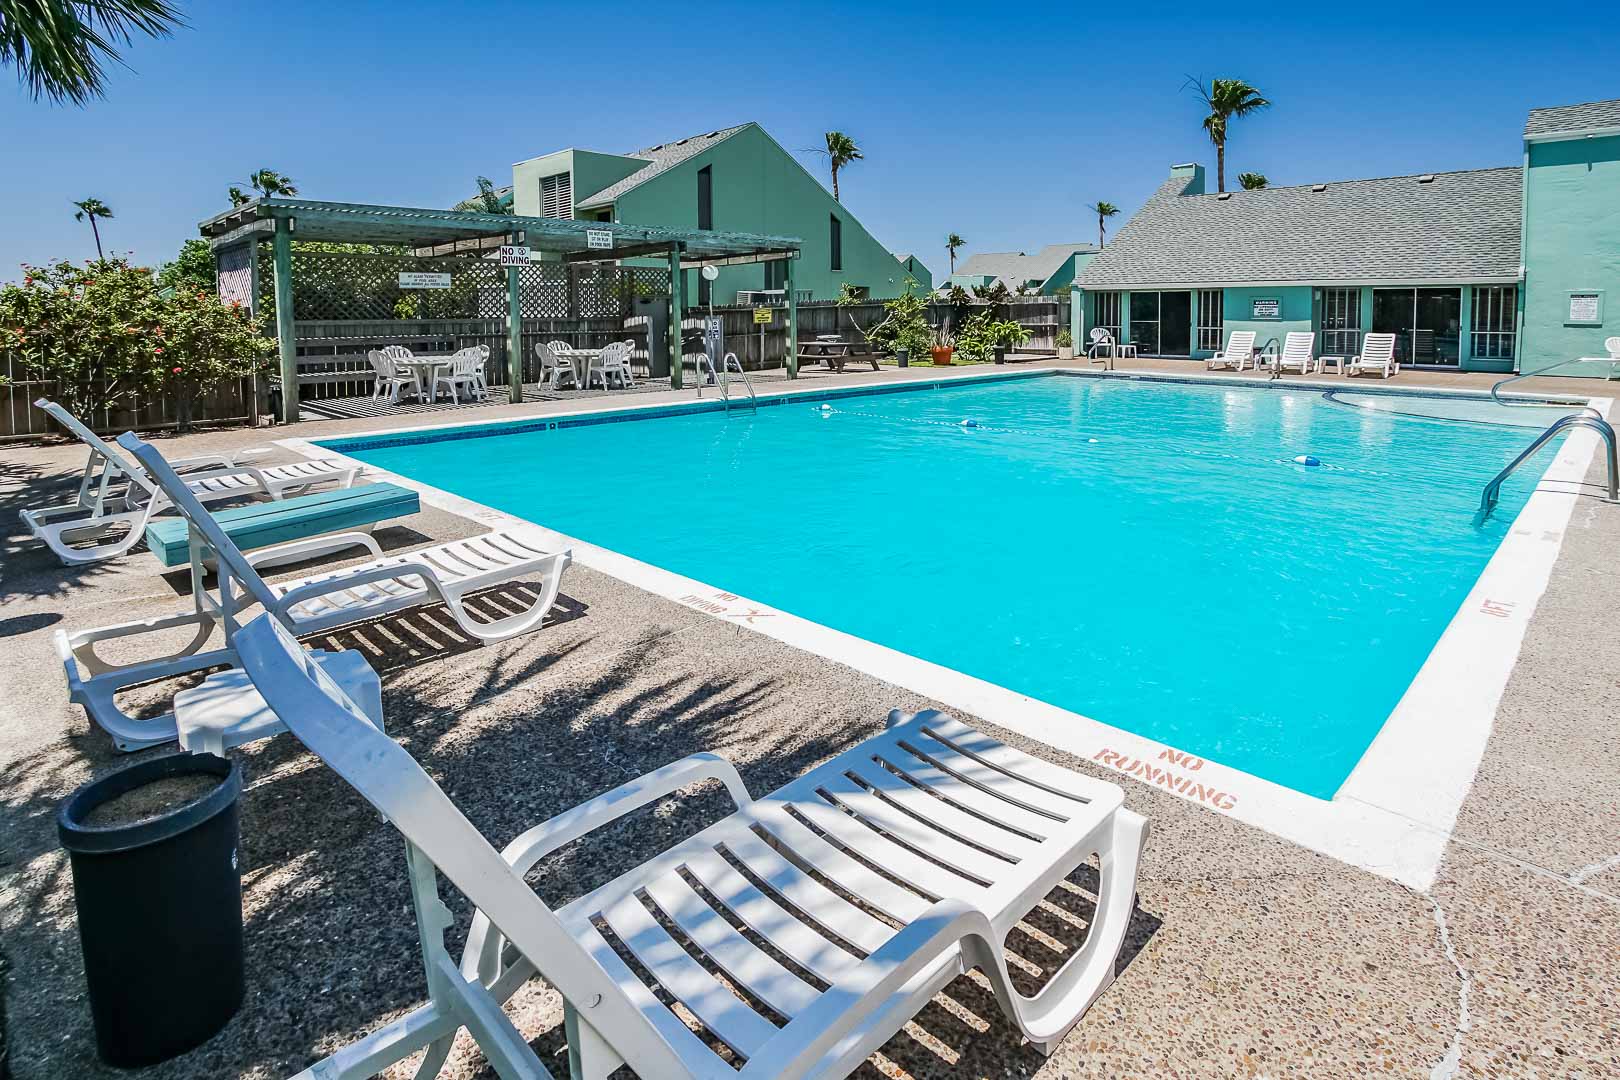 An outdoor swimming pool at VRI's Puente Vista Resort in Texas.